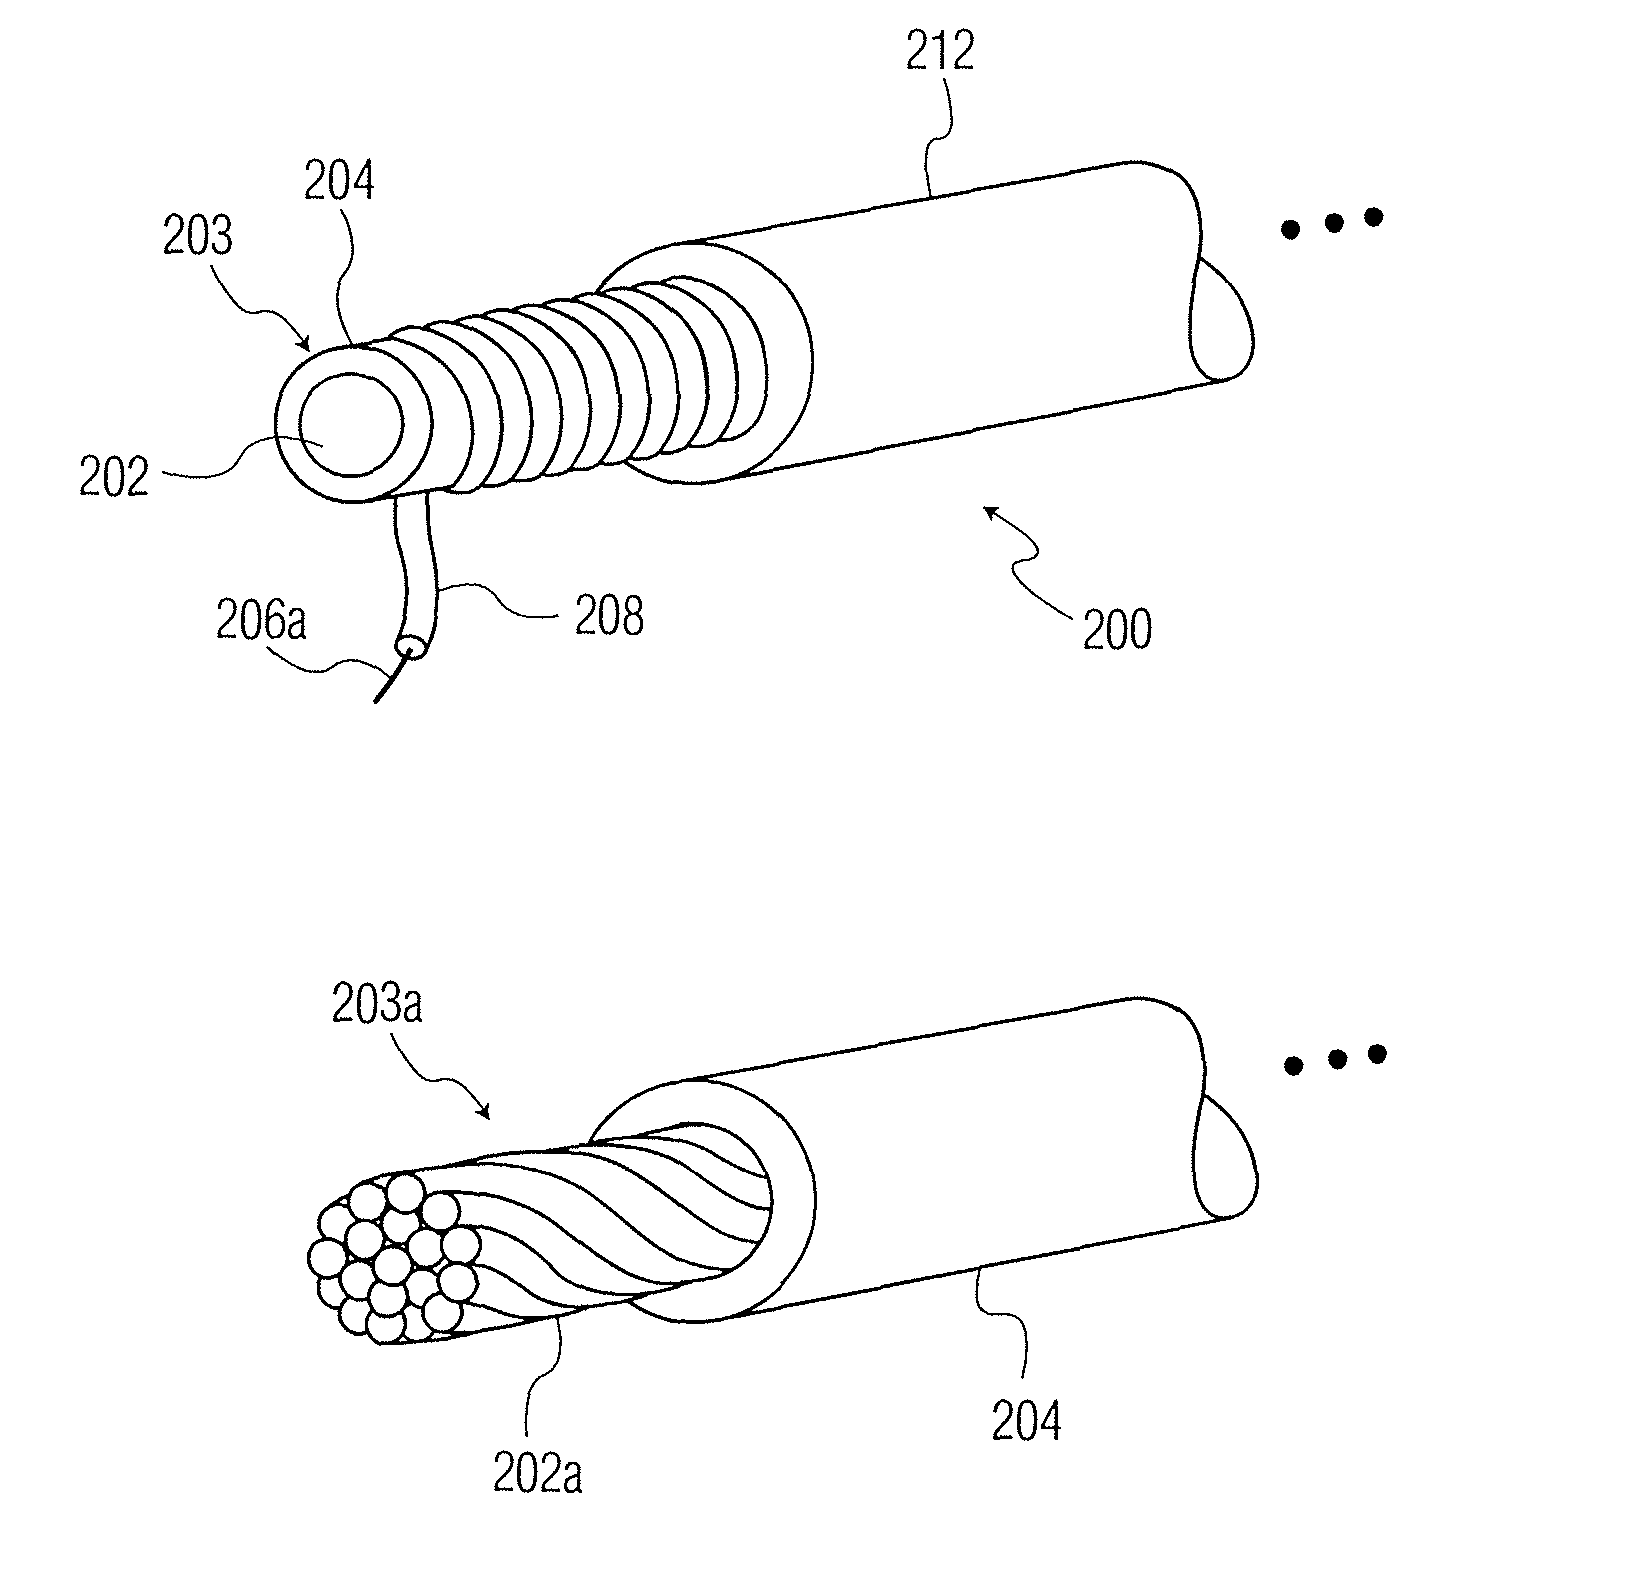 Fiber optic acoustic sensor arrays, fiber optic sensing systems and methods of forming and operating the same